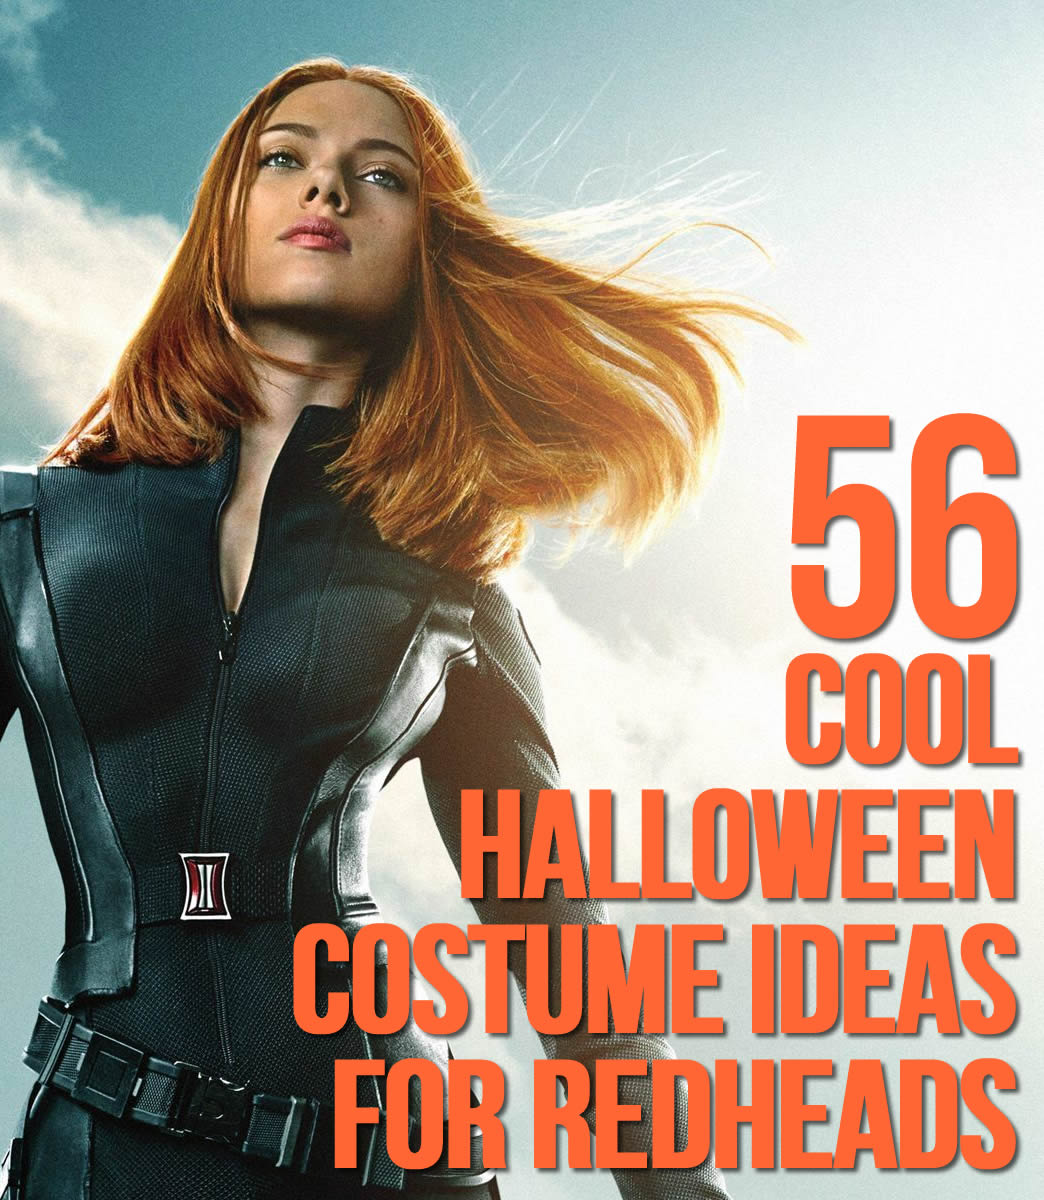 55 Cool Halloween Costume Ideas For Redheads - Scarlett Johansson is only one!